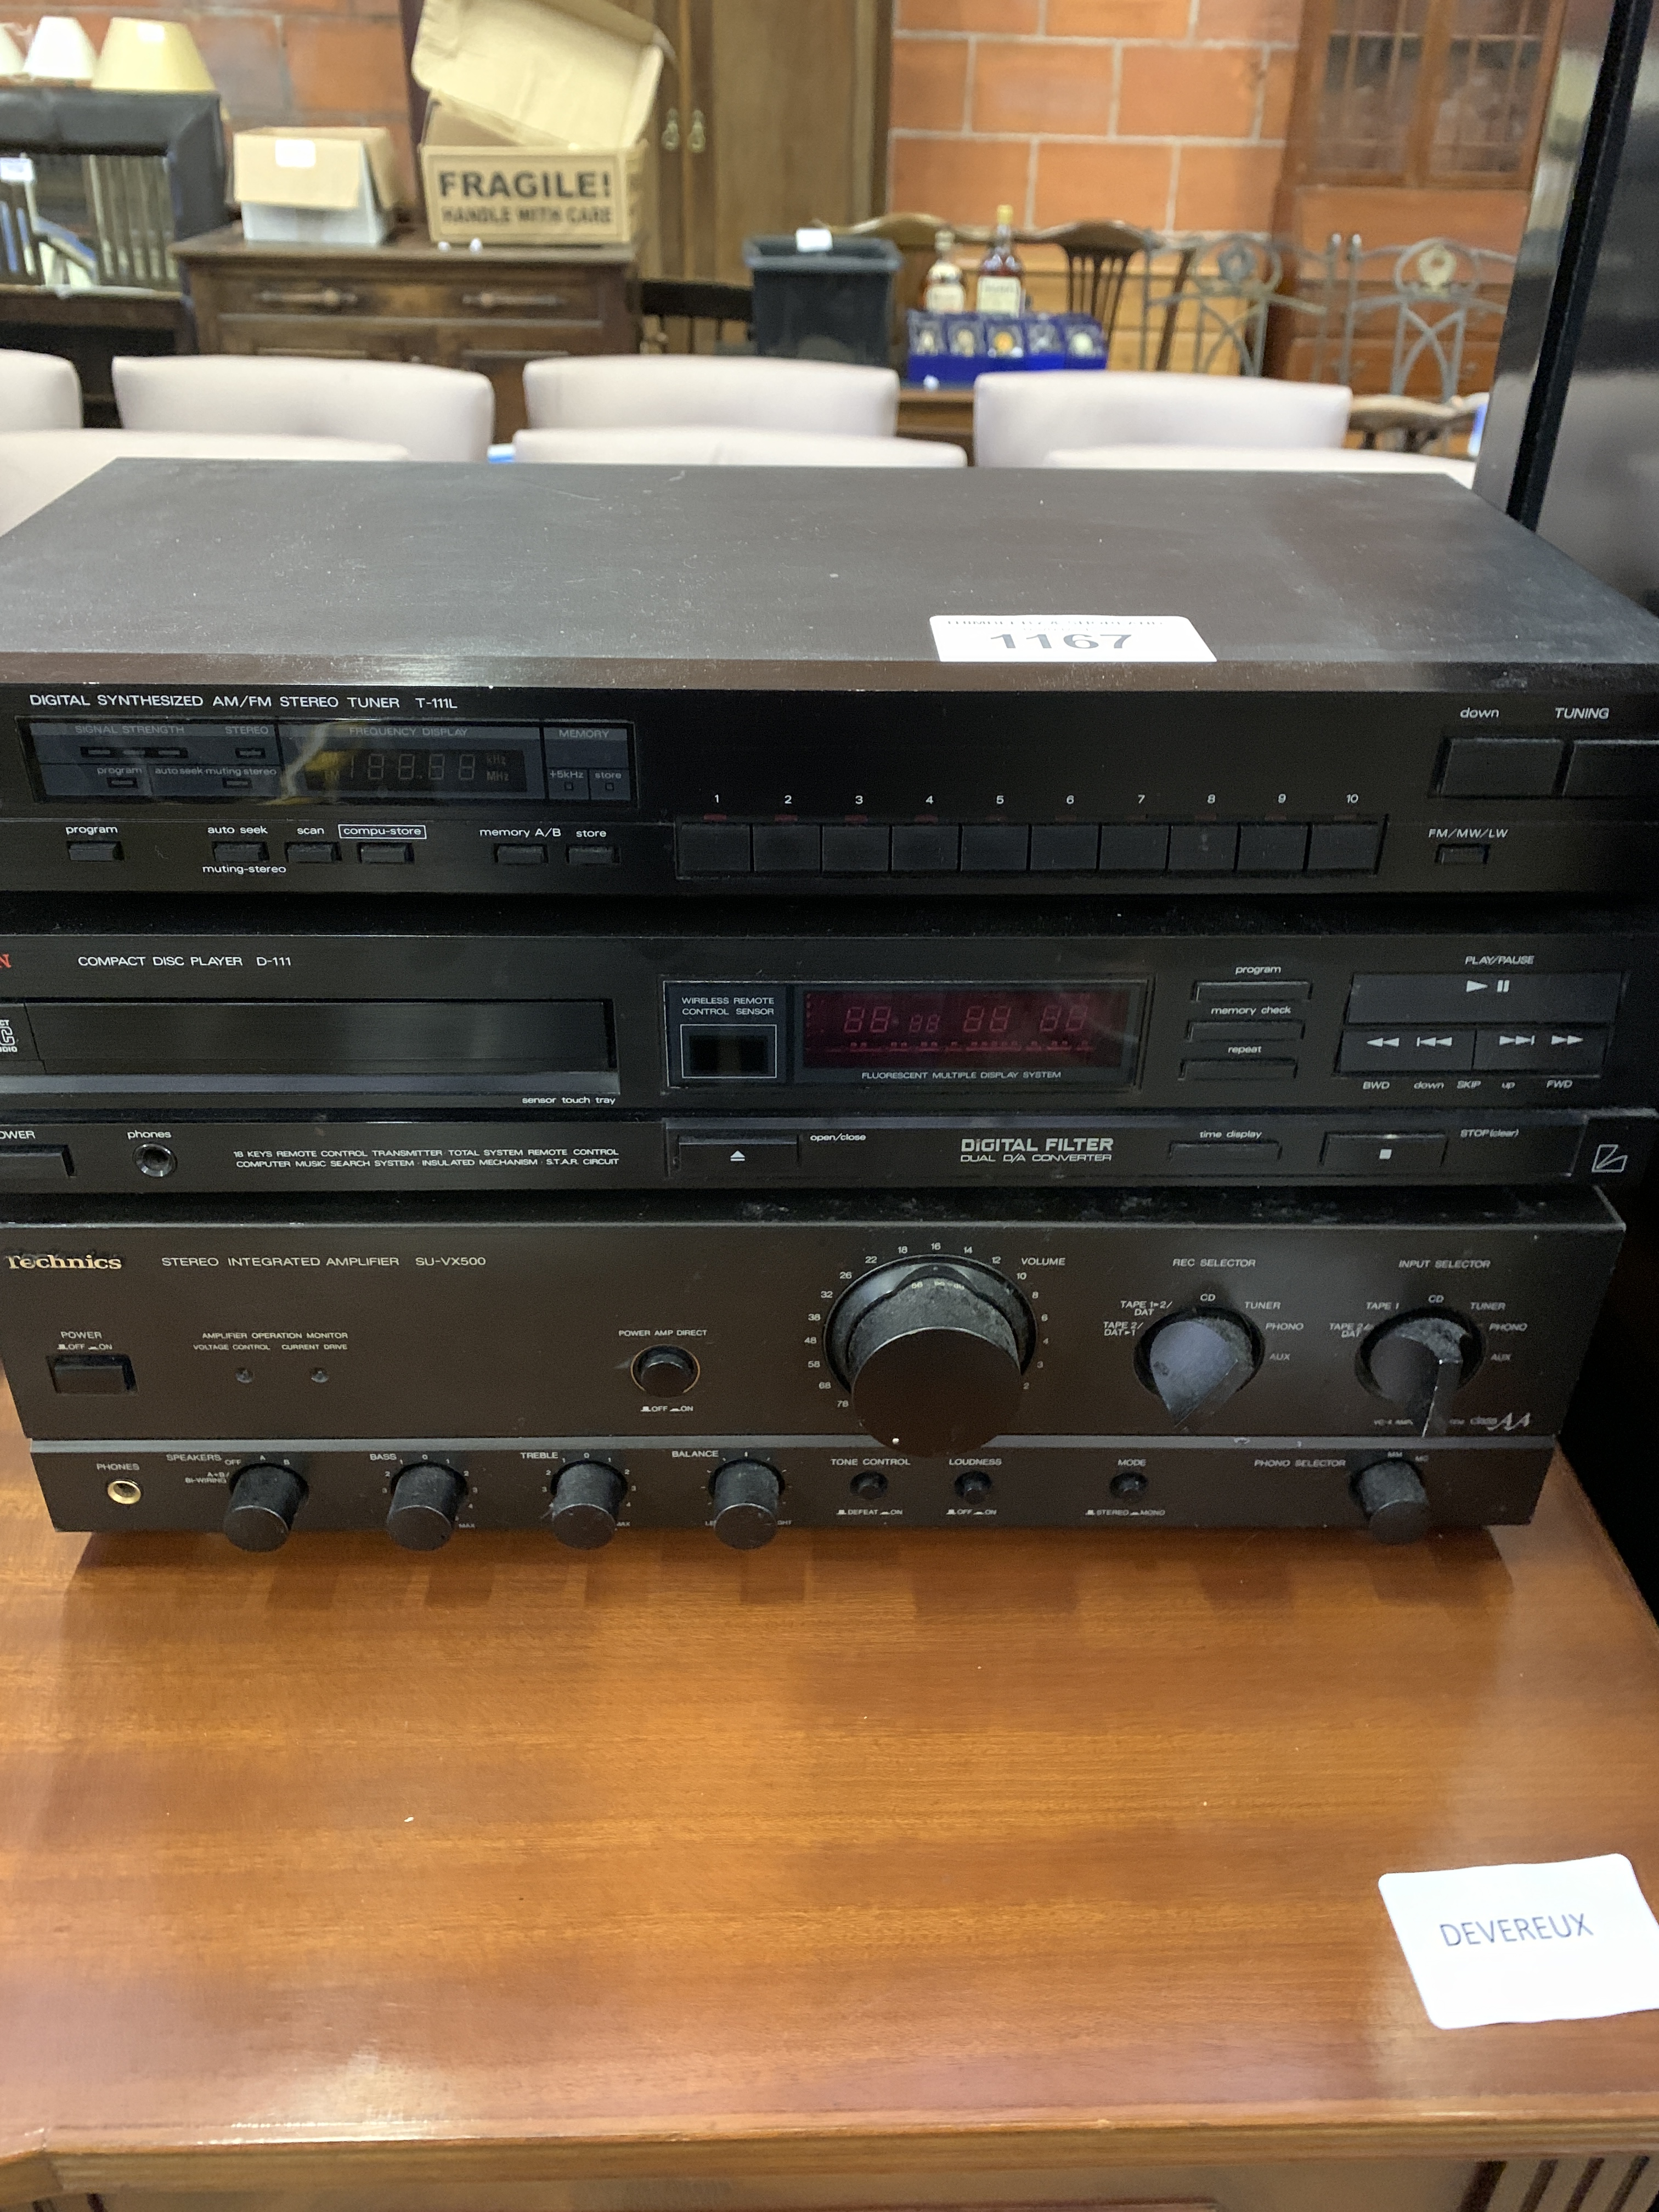 Technics amplifier; Luxman compact disc player, and AM/FM tuner.